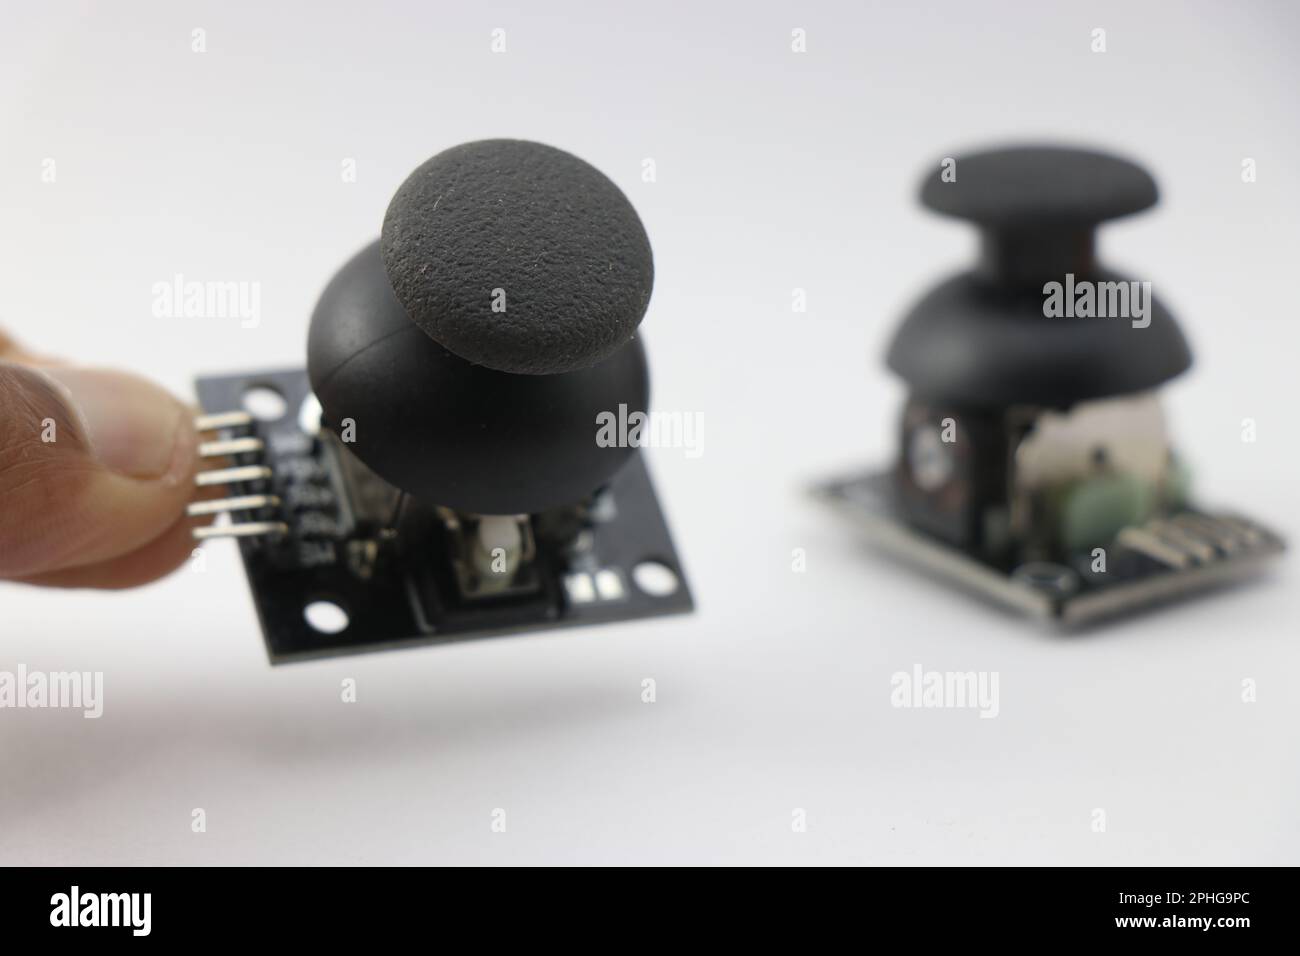 Joystick module with dual axis control used in making electronics projects held in the hand Stock Photo